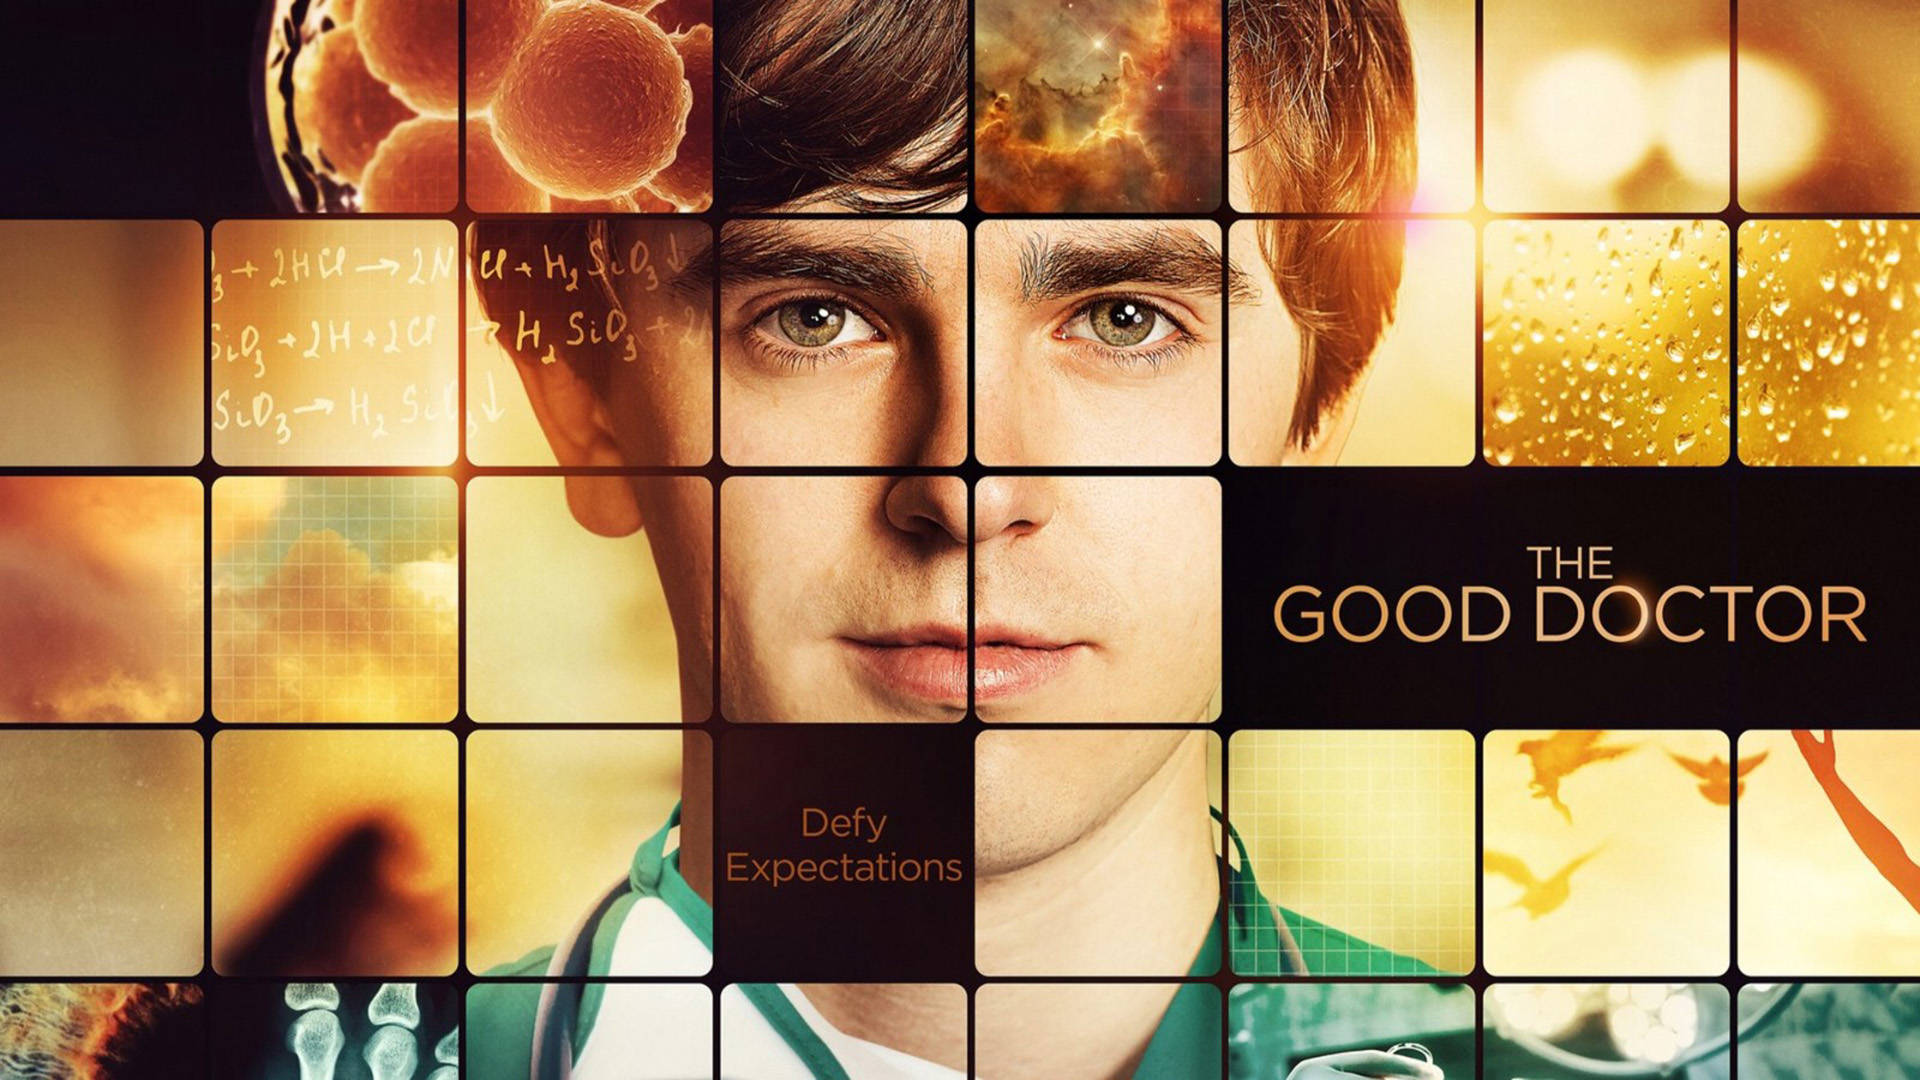 The Good Doctor Season 2 Poster Background